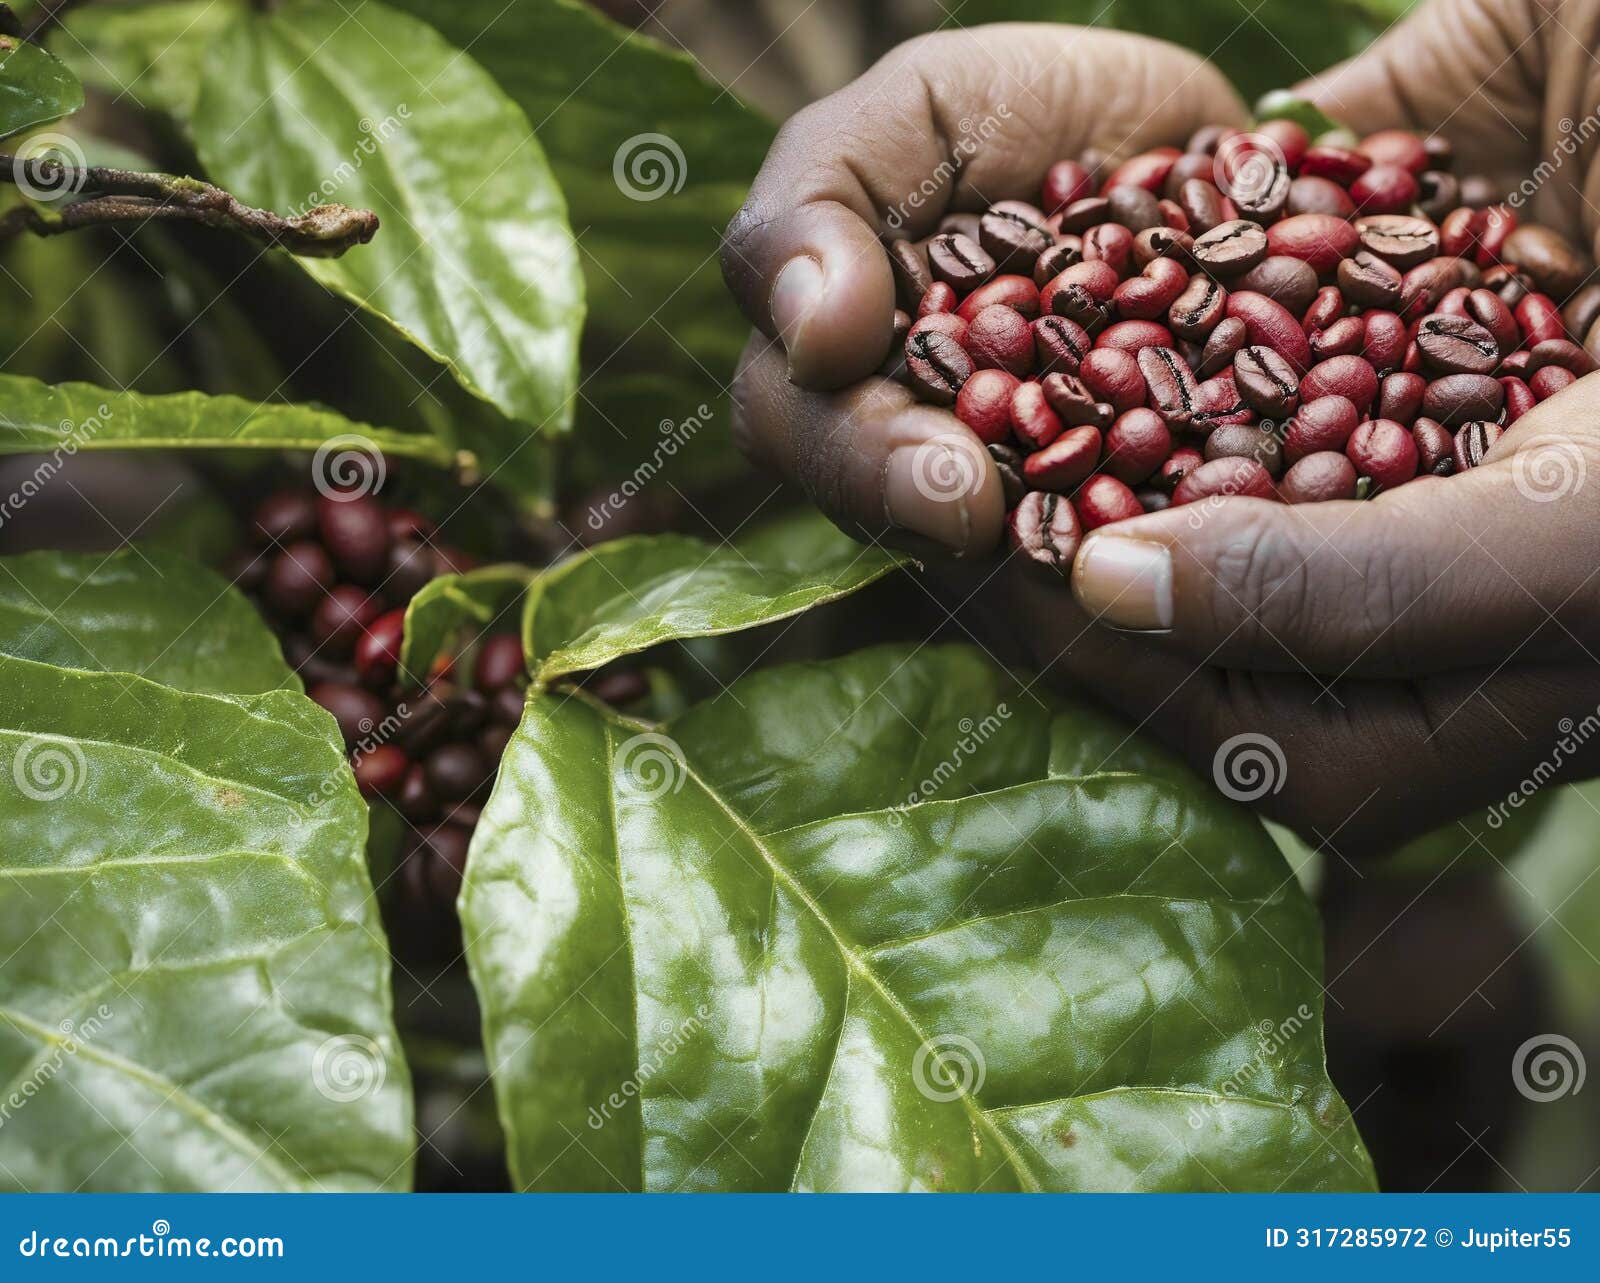 hands hold brown roasted coffee beans. harvesting coffee beans field plantation hand picking in farm. harvesting robusta and